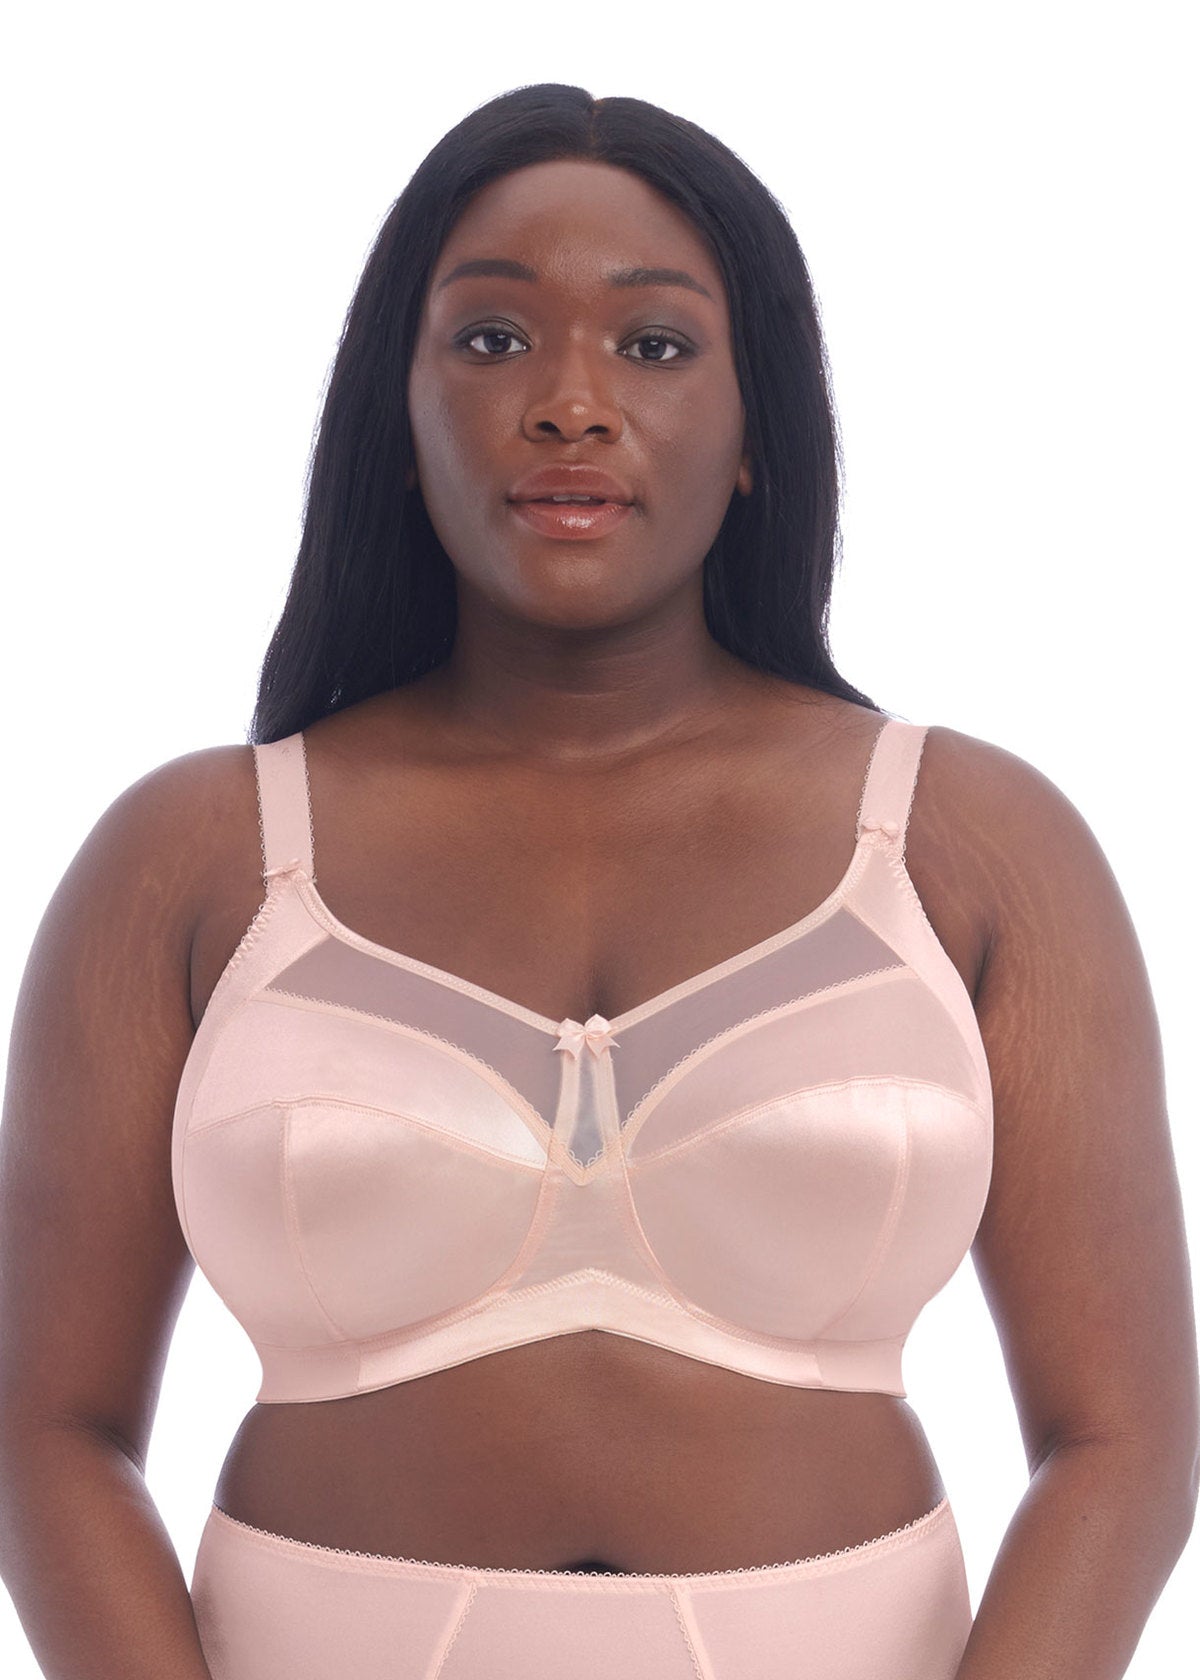 https://illusionslingerie.com.au/cdn/shop/products/GD6093-PLH-primary-Goddess-Keira-Pearl-Blush-Non-Wired-Bra.jpg?v=1653279147&width=1200